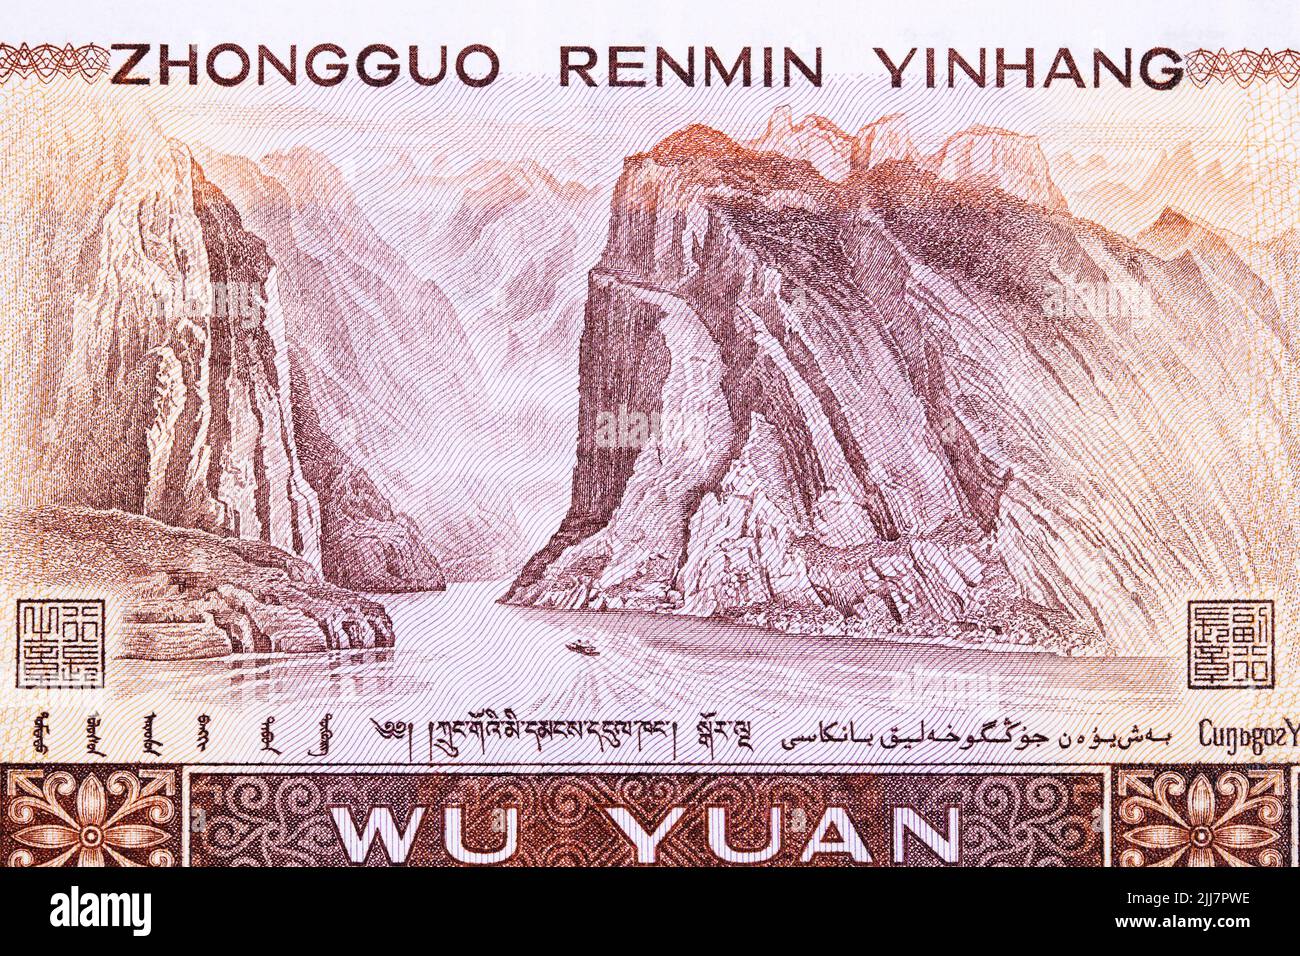 Three Gorges of the Yangtze River from old Chinese money - Yuan Stock Photo